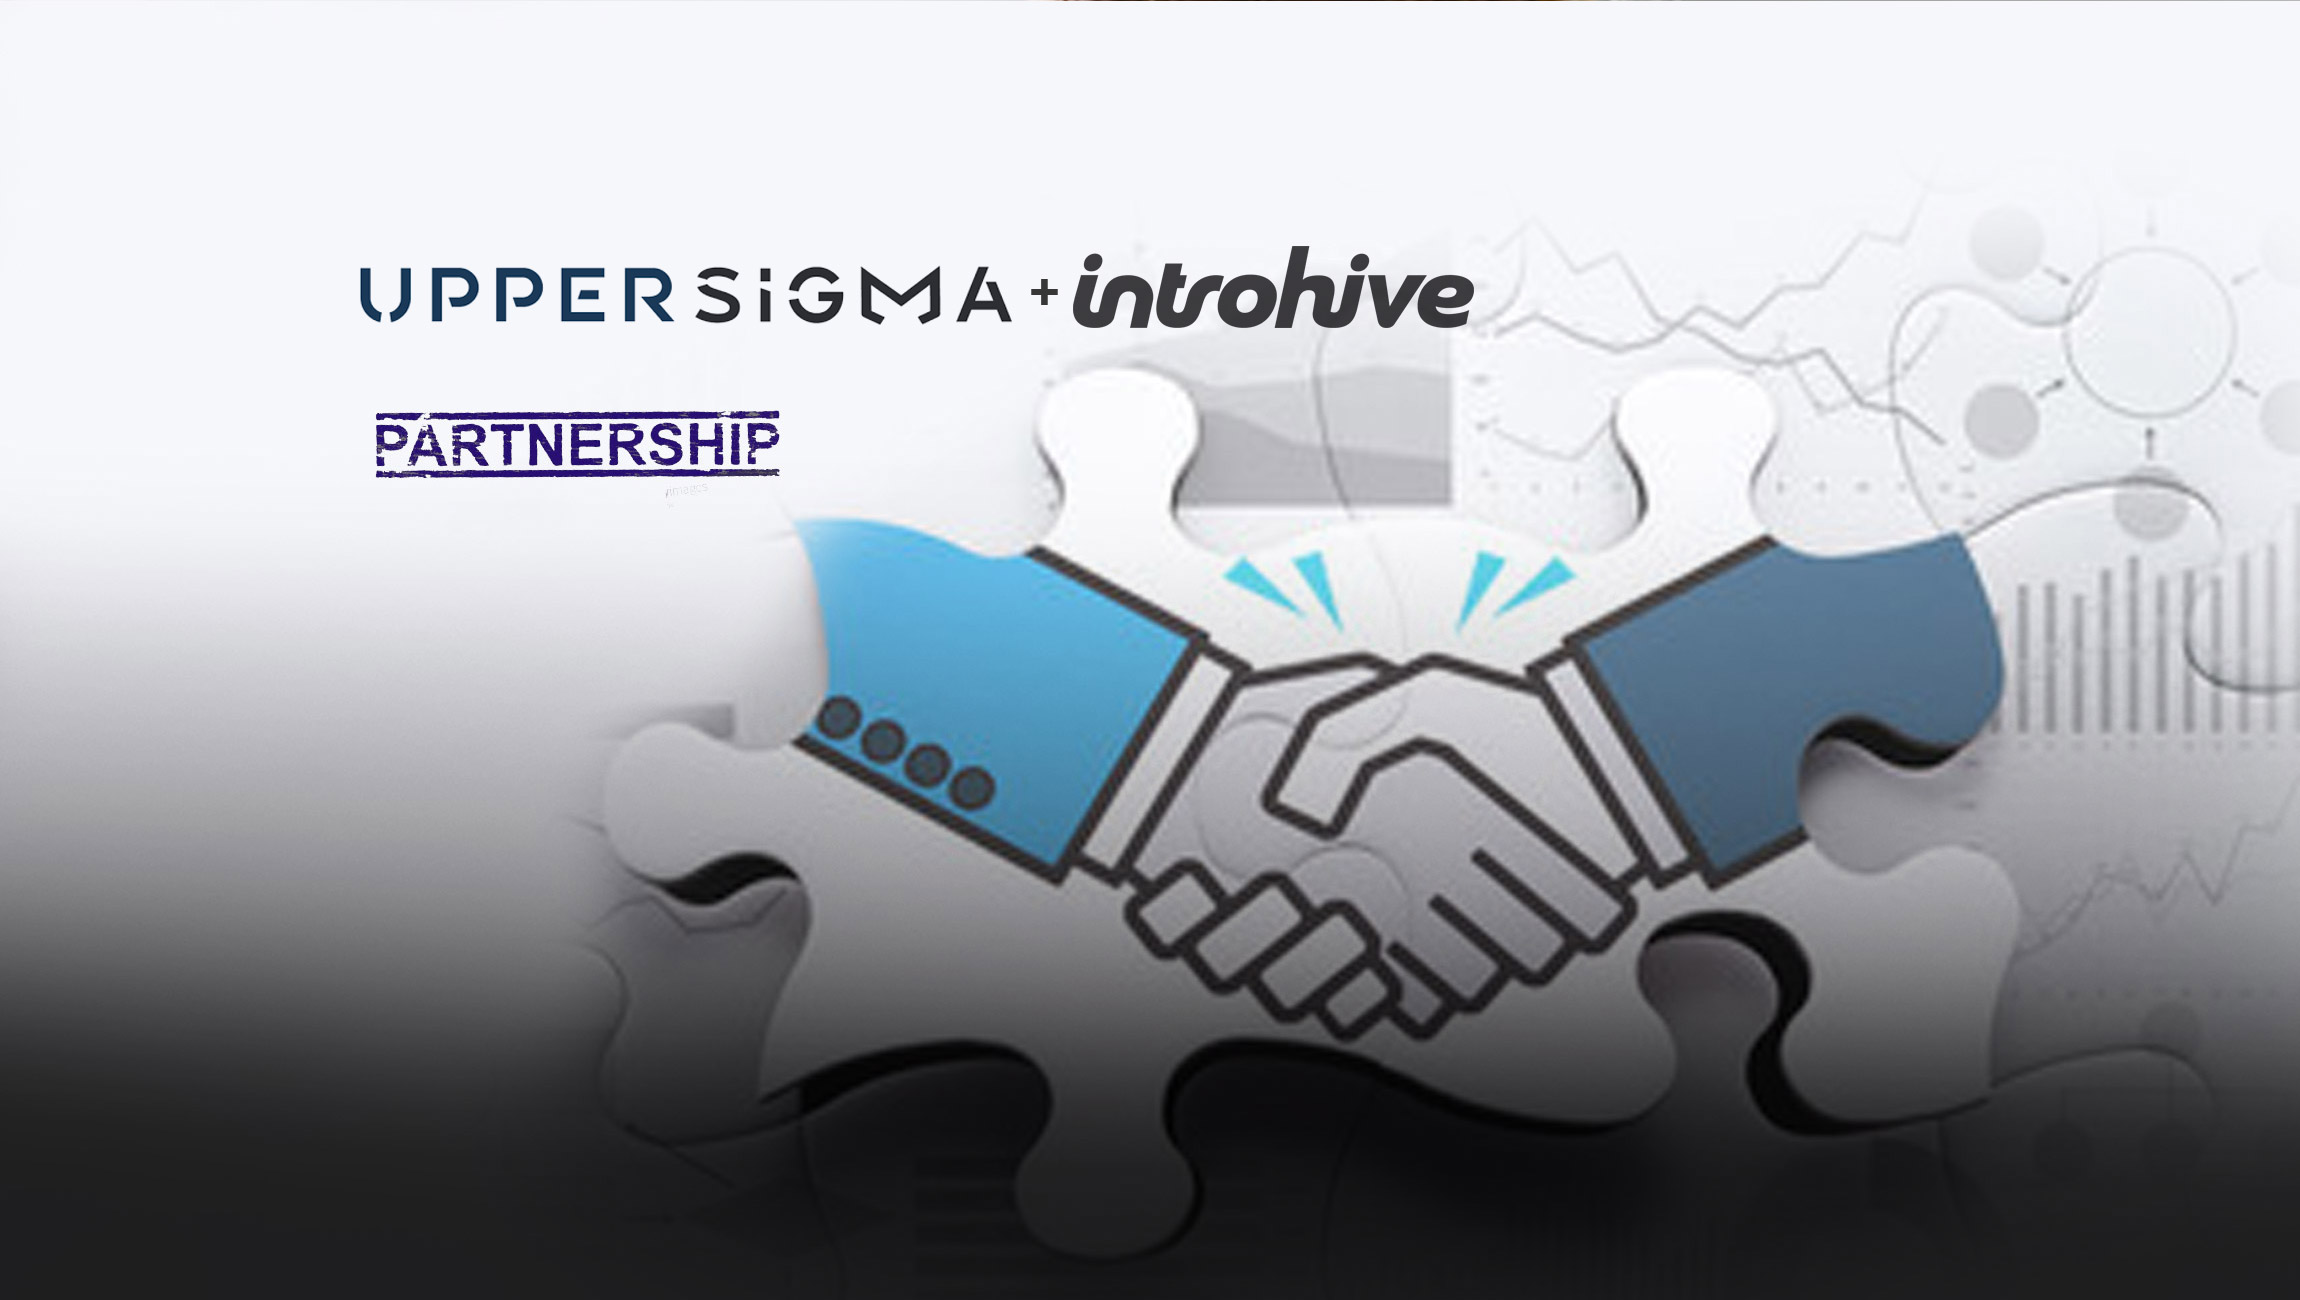 Introhive and Upper Sigma Partner to Add Value to Shared Salesforce Customers